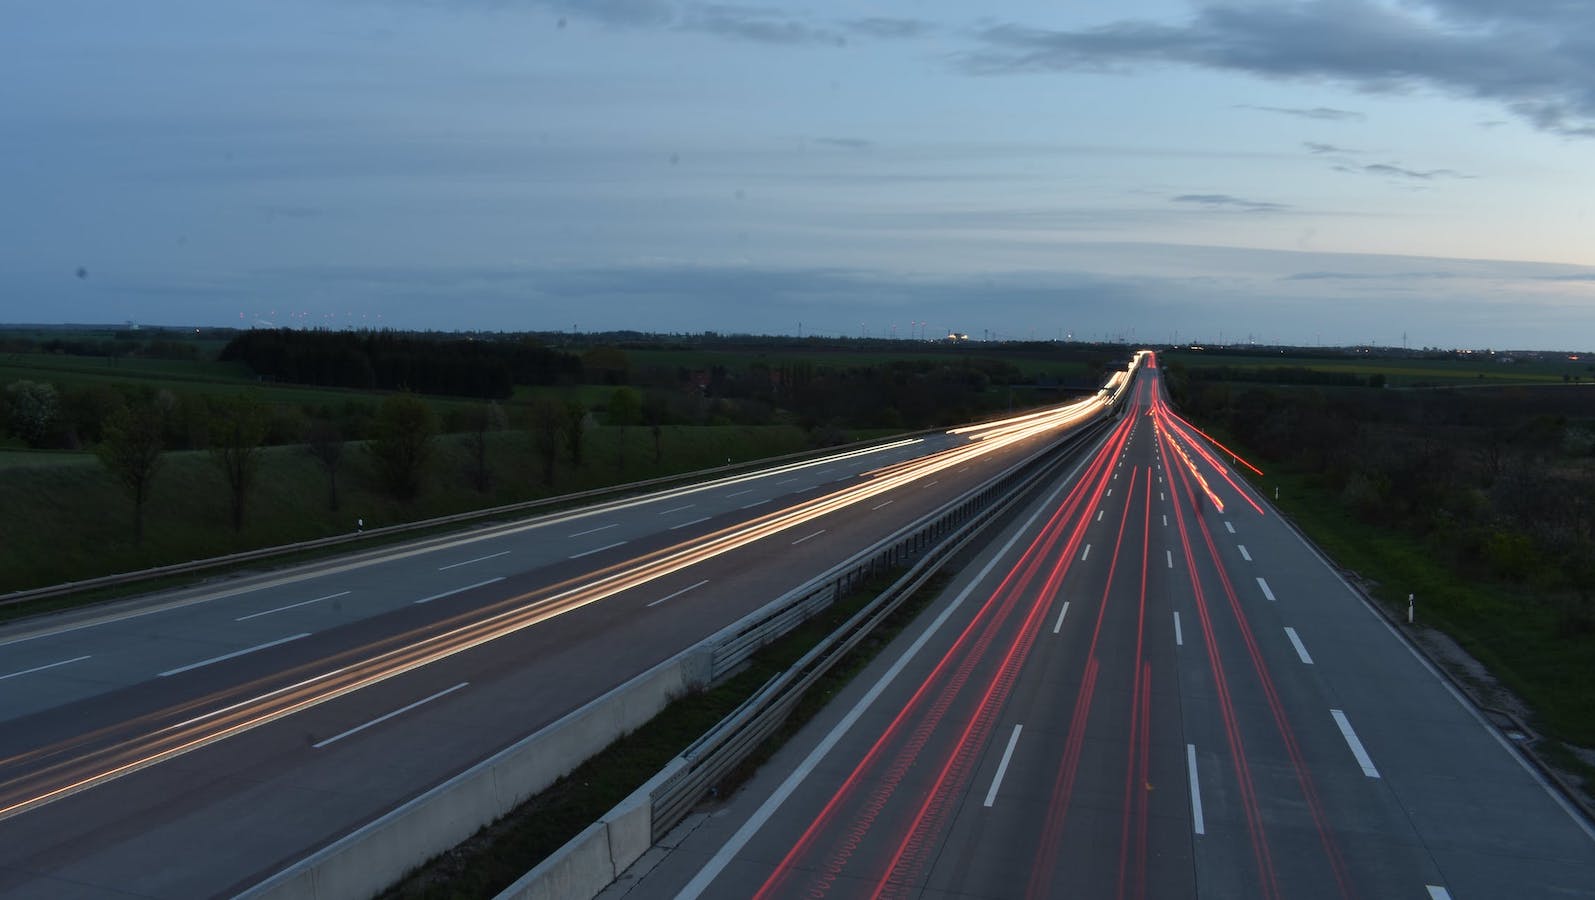 Time lapse photo of a freeway at dusk with red and white lights